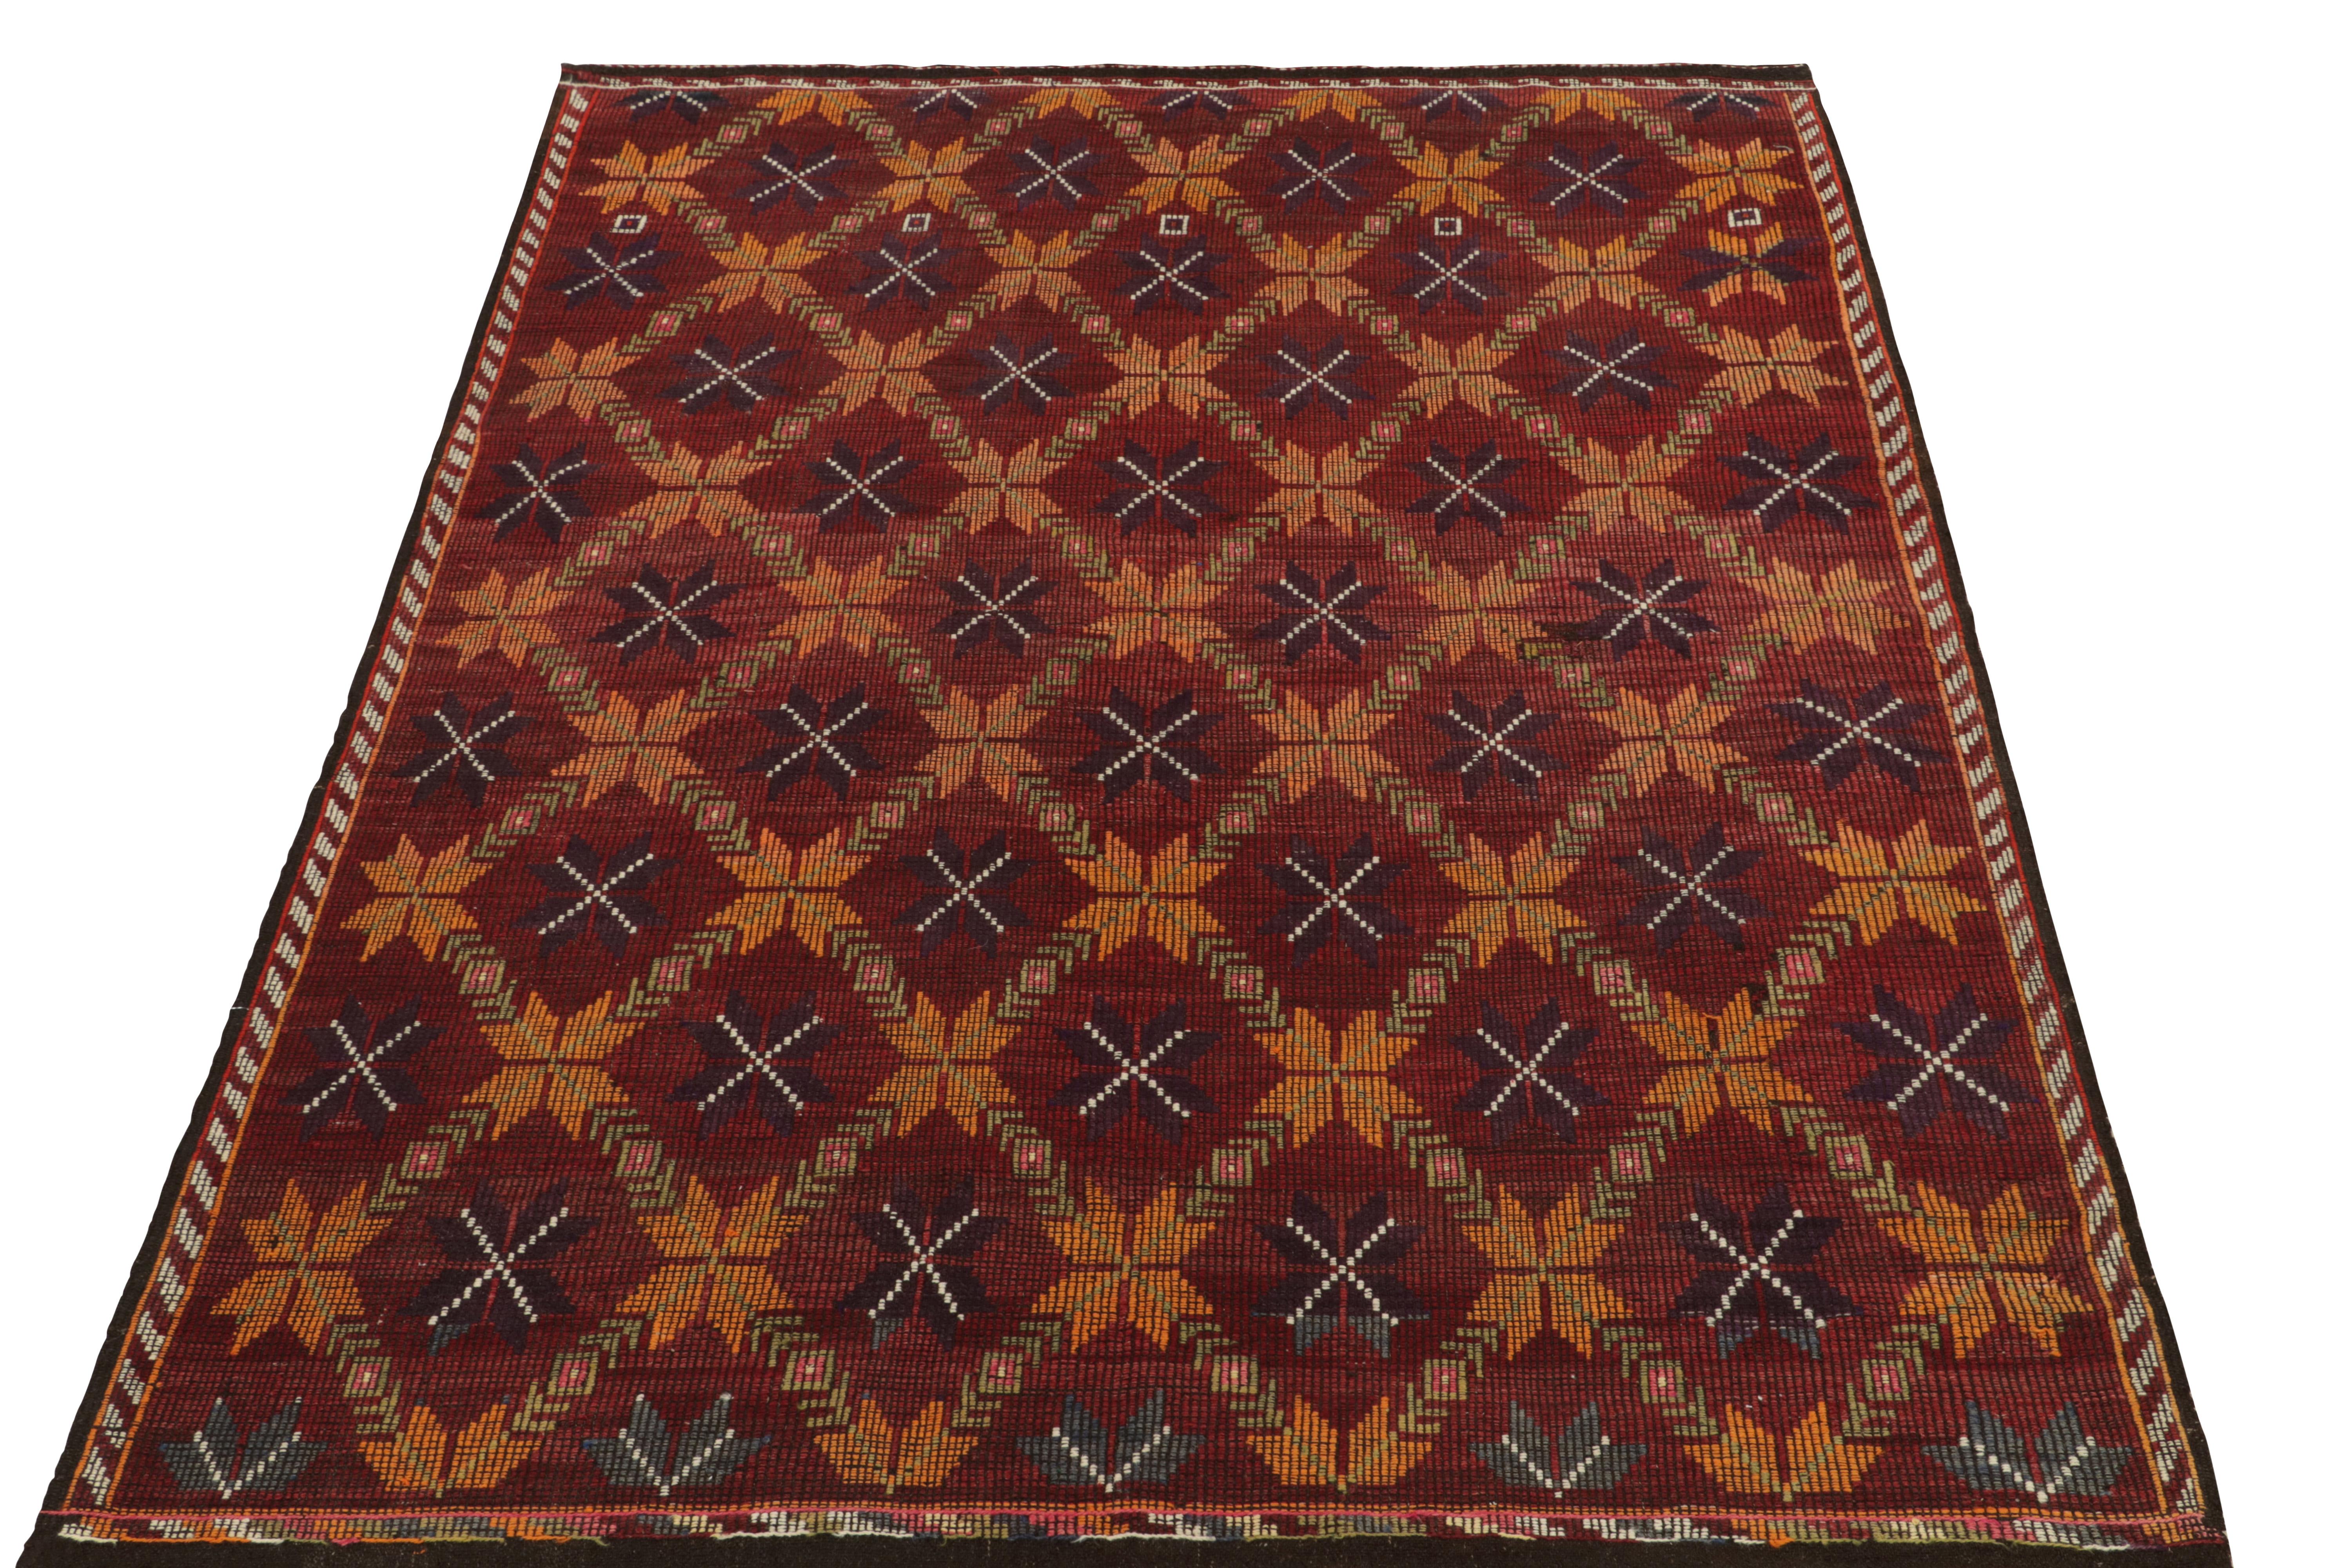 Connoting the Kurdish style, a vintage Cecim kilim rug entering our flat weave collection. This 7x9 rug delights in impeccable embroidery & detailing in design, famed in the textural weaves known to this line. Innovating tribal sensibilities of the